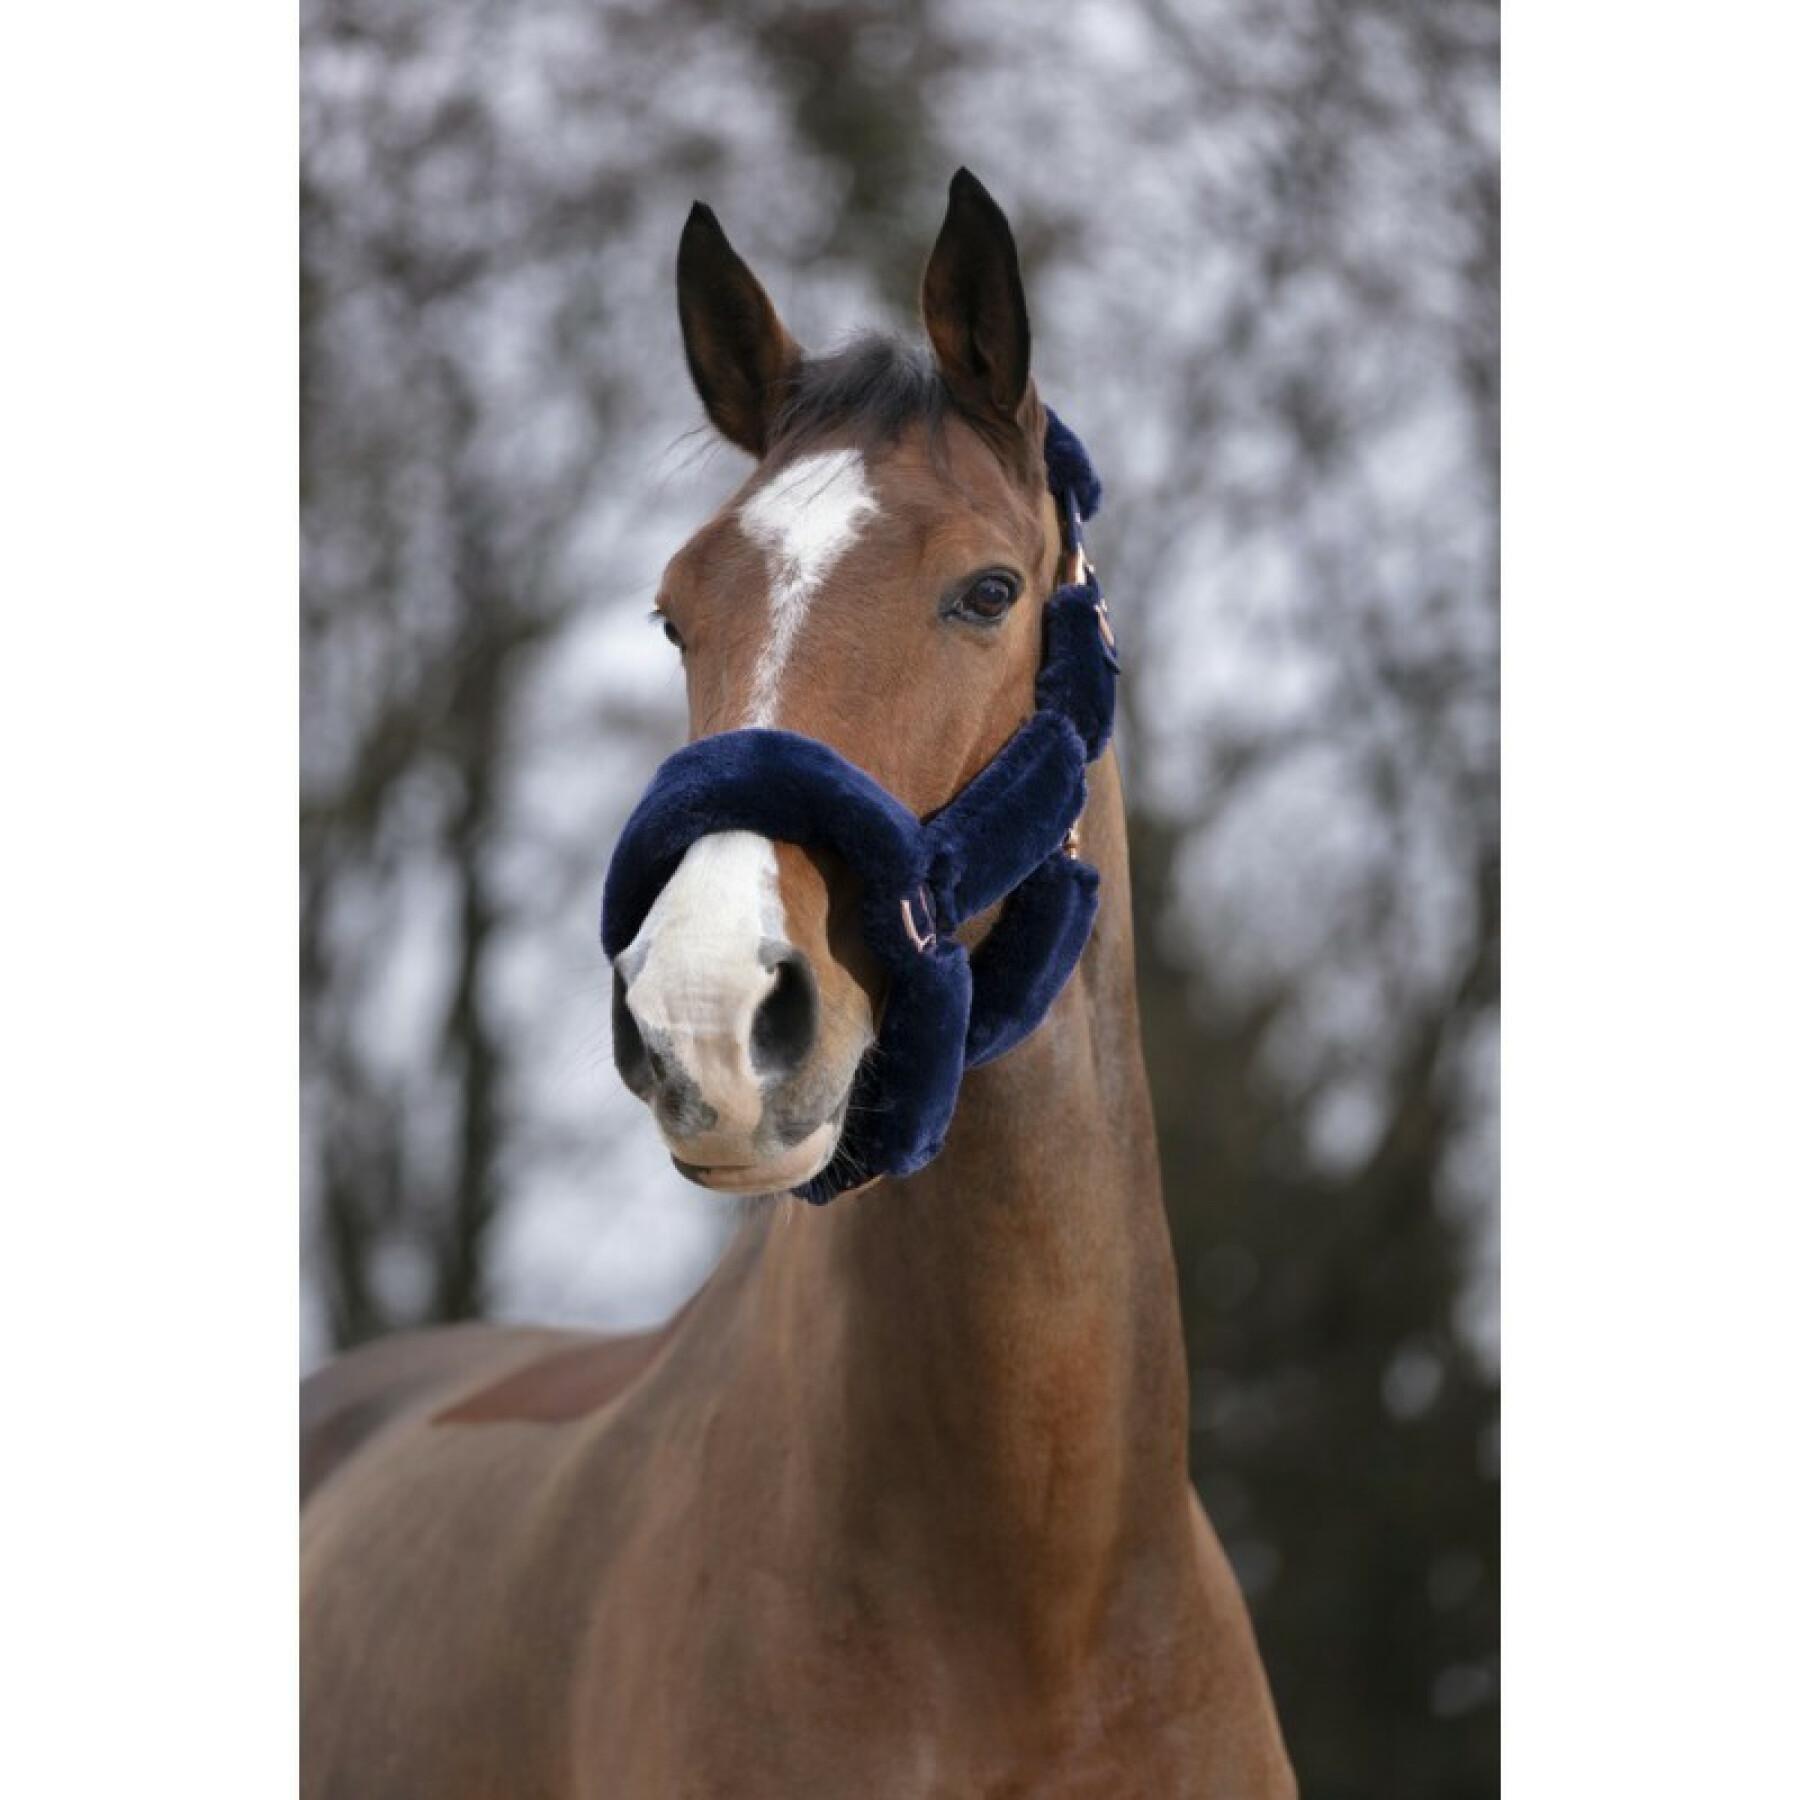 Licol pour cheval Equithème Teddy rose gold